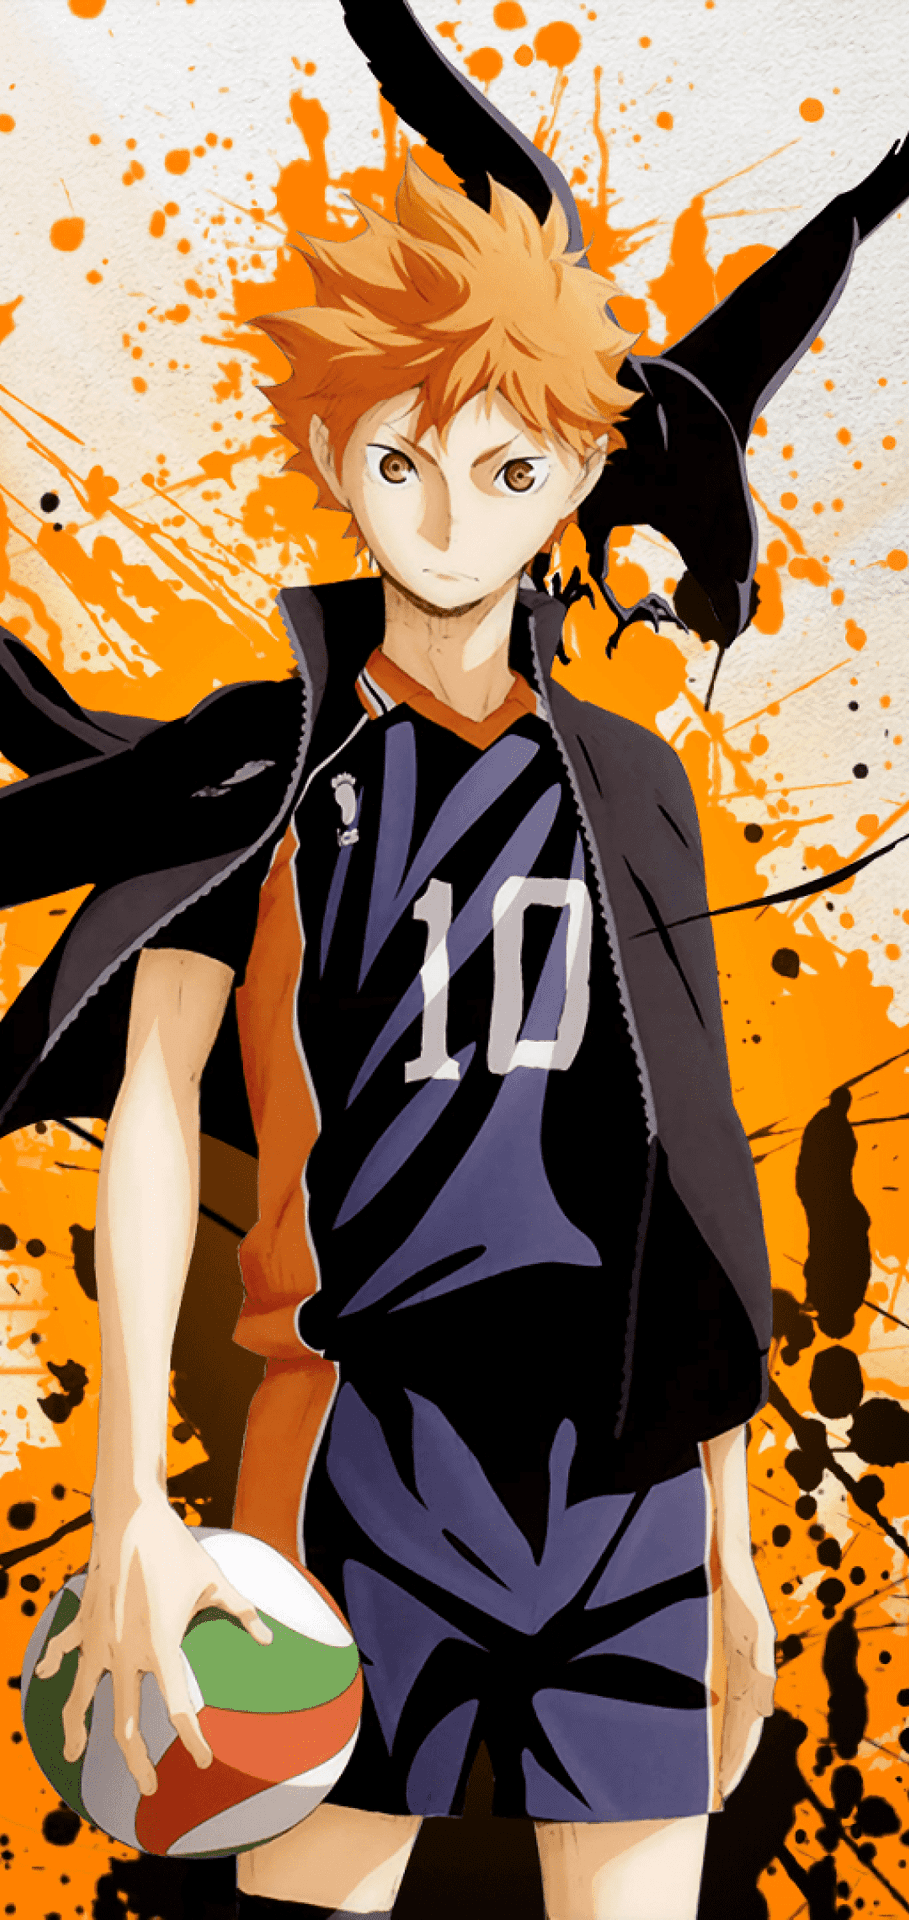 Captivating Moment From Haikyuu Anime Serie